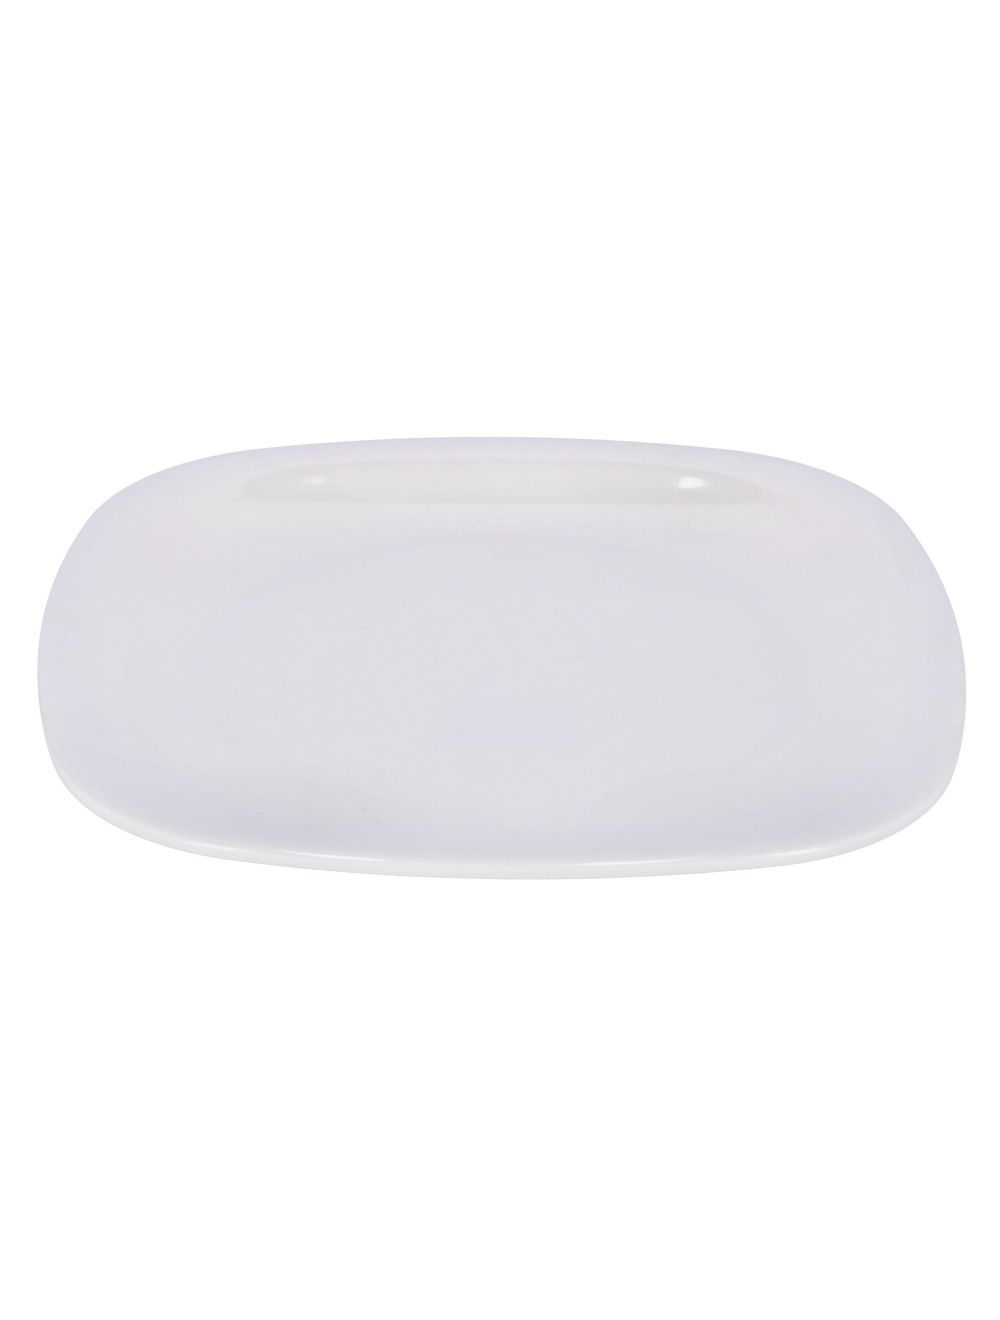 Royalford RF9860 - 7.5-inch Opal Ware Square Plate